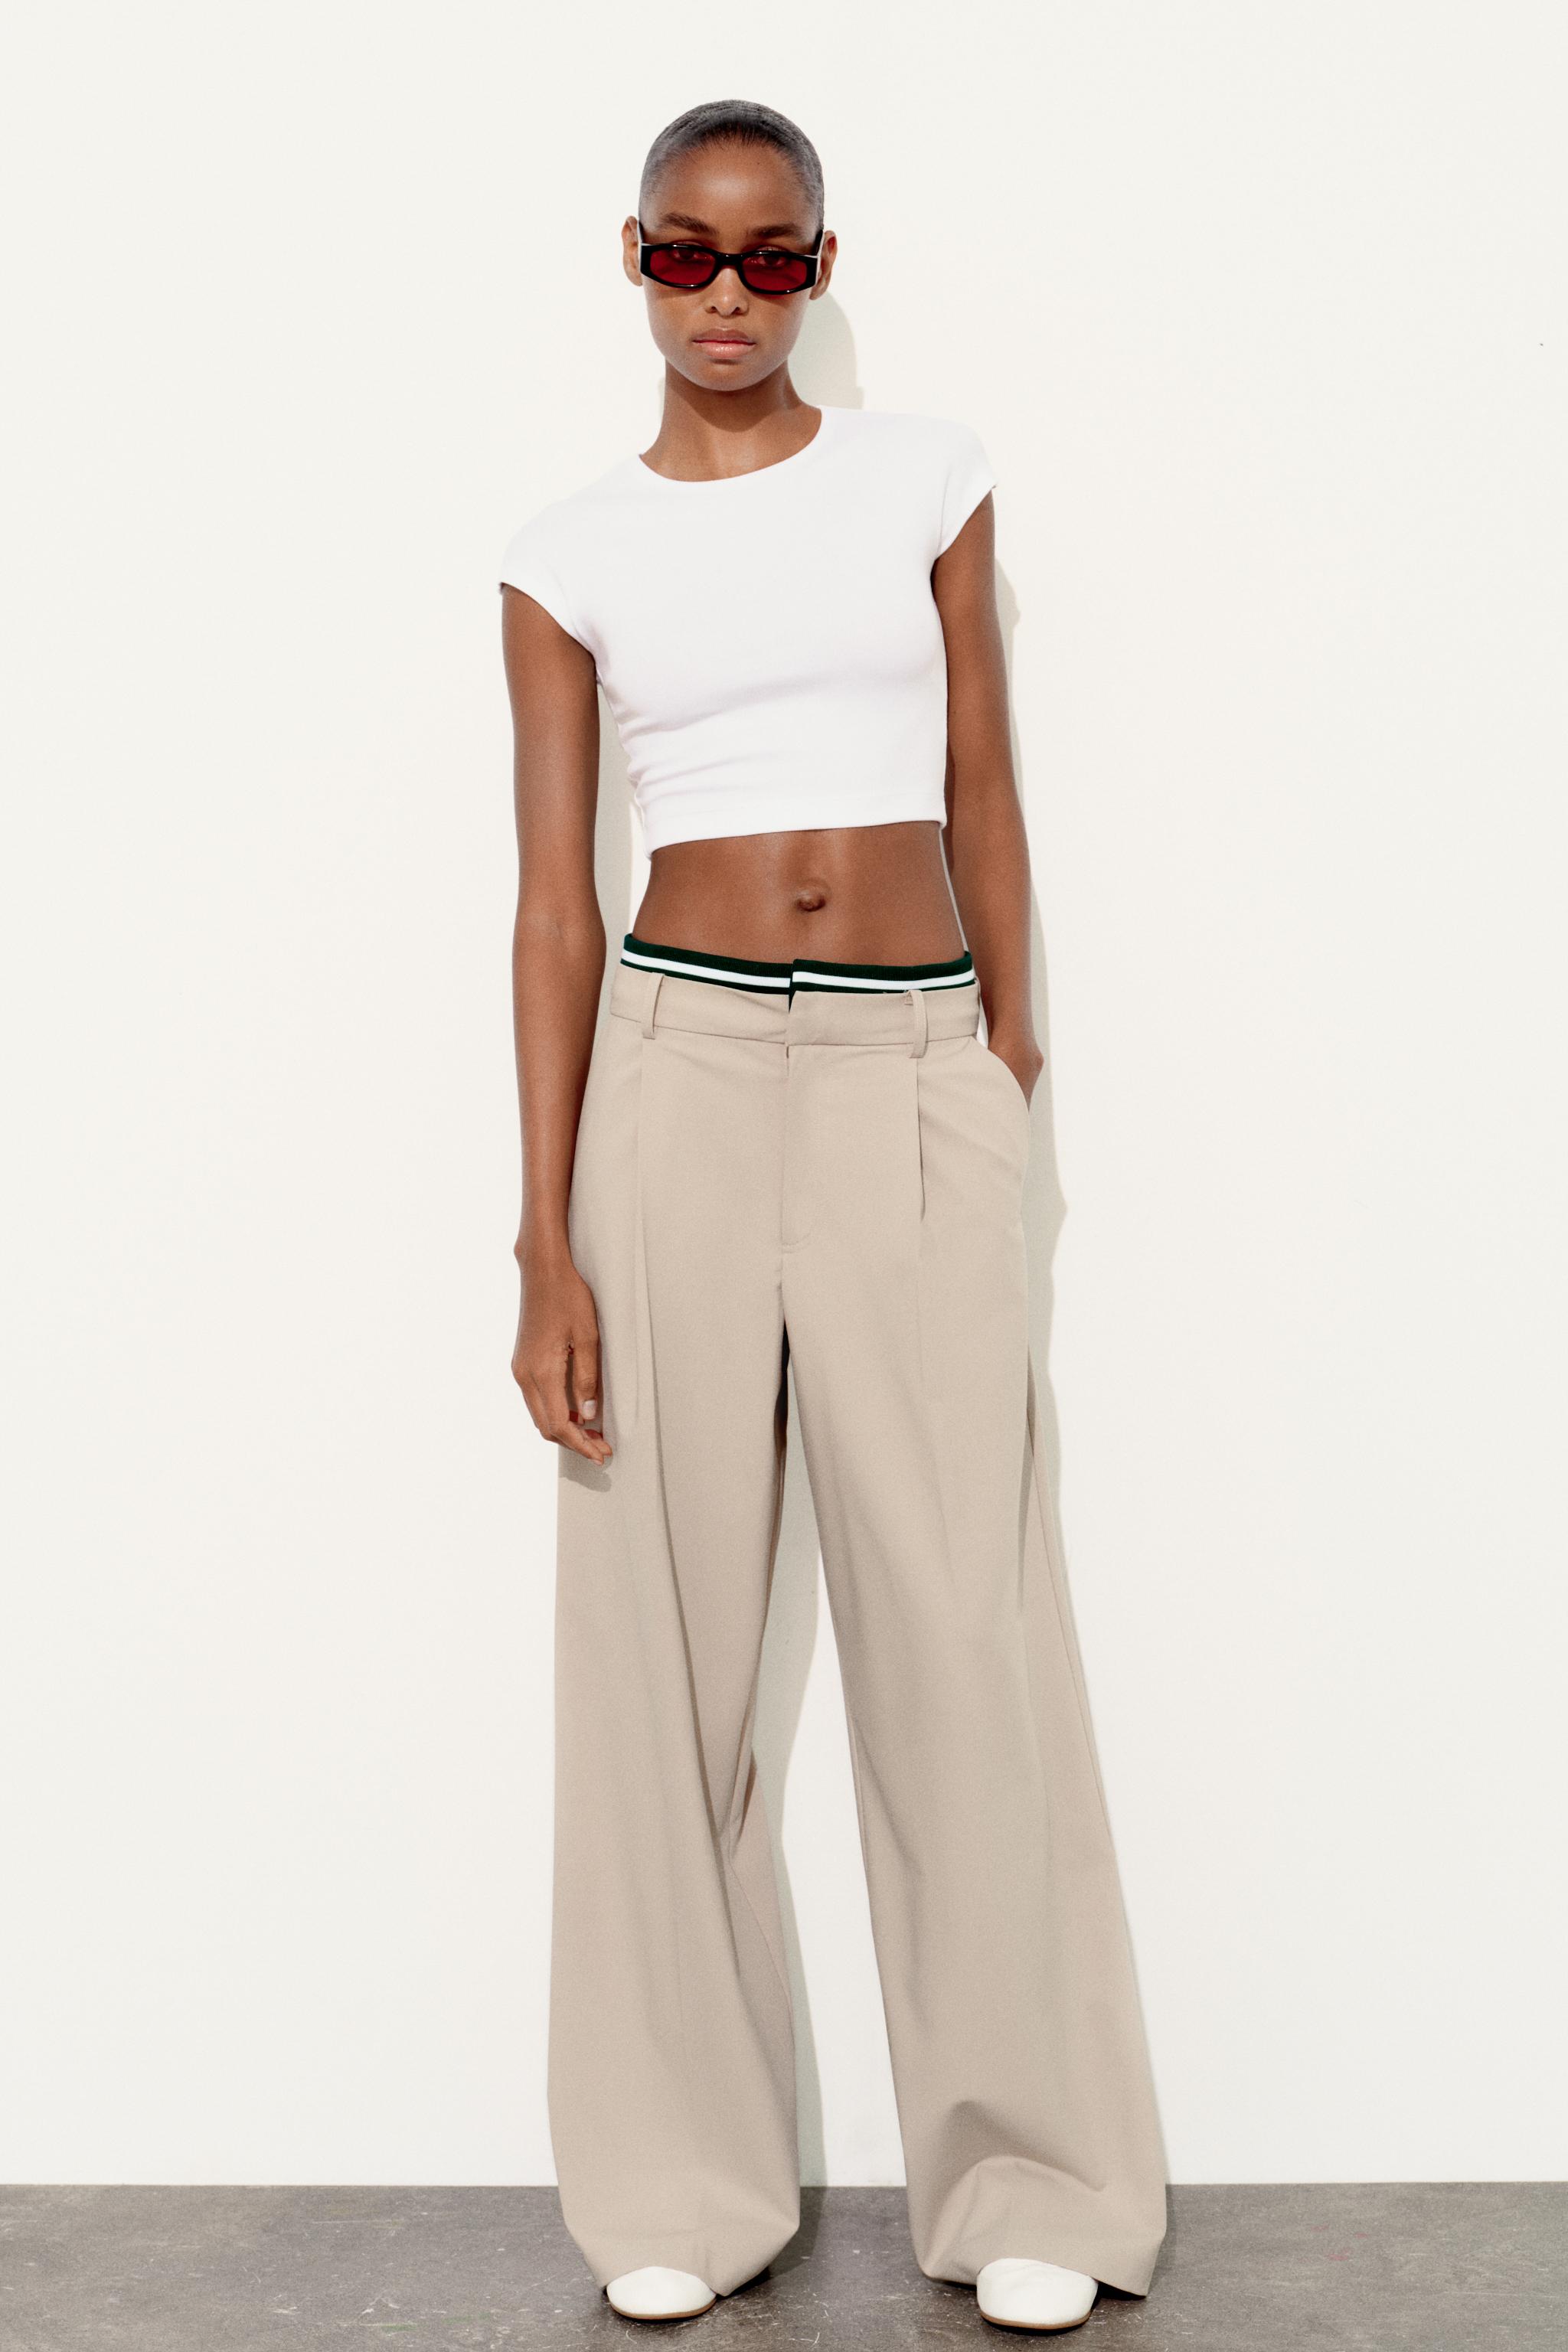 BAND FULL LENGTH PANTS - taupe brown